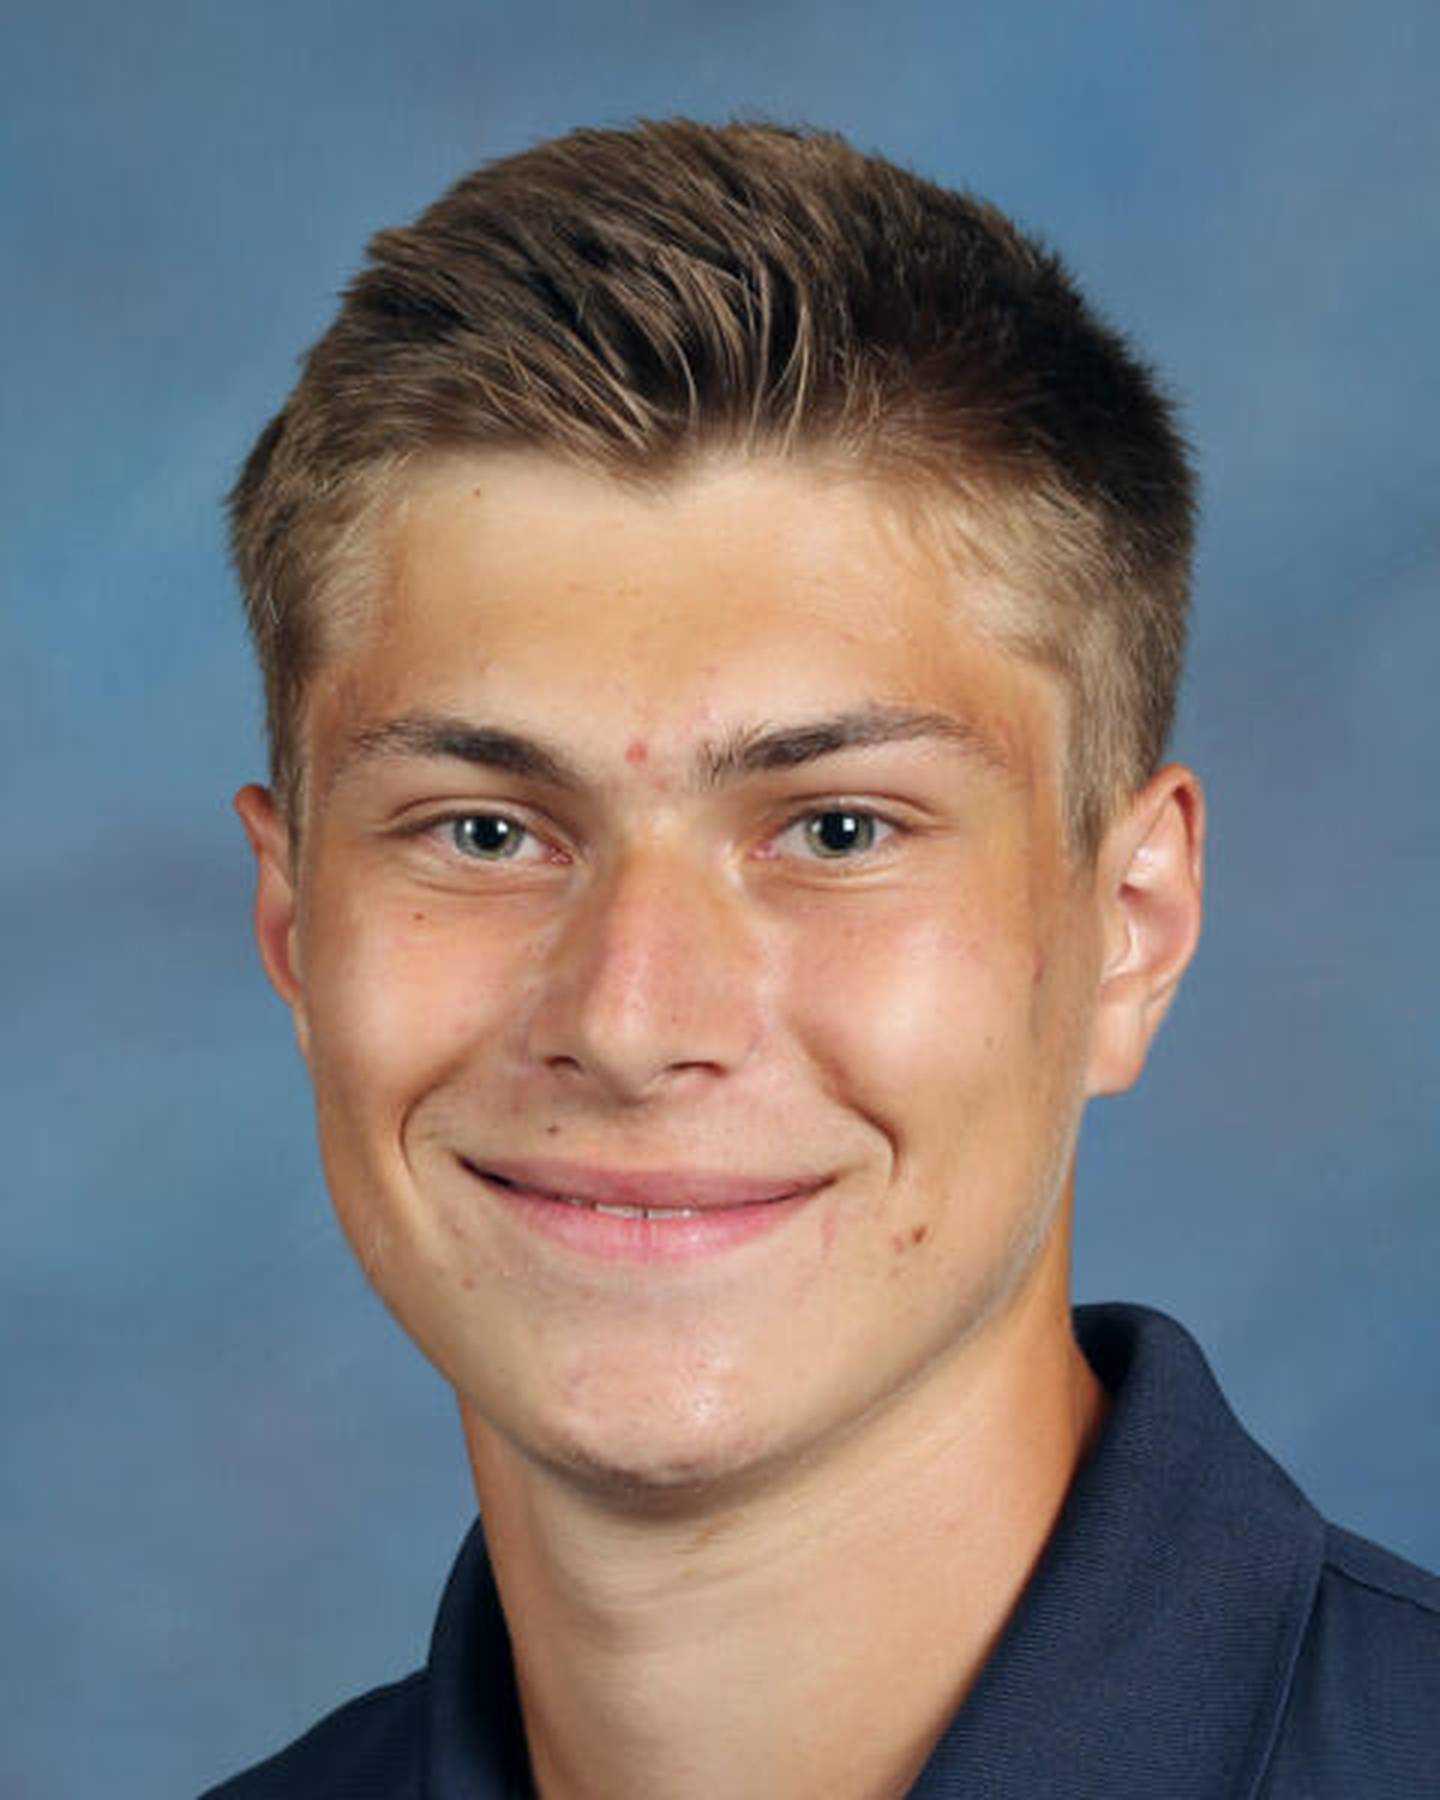 Joliet Catholic Academy named Alec Galyon as a Student of the Month for December 2021.